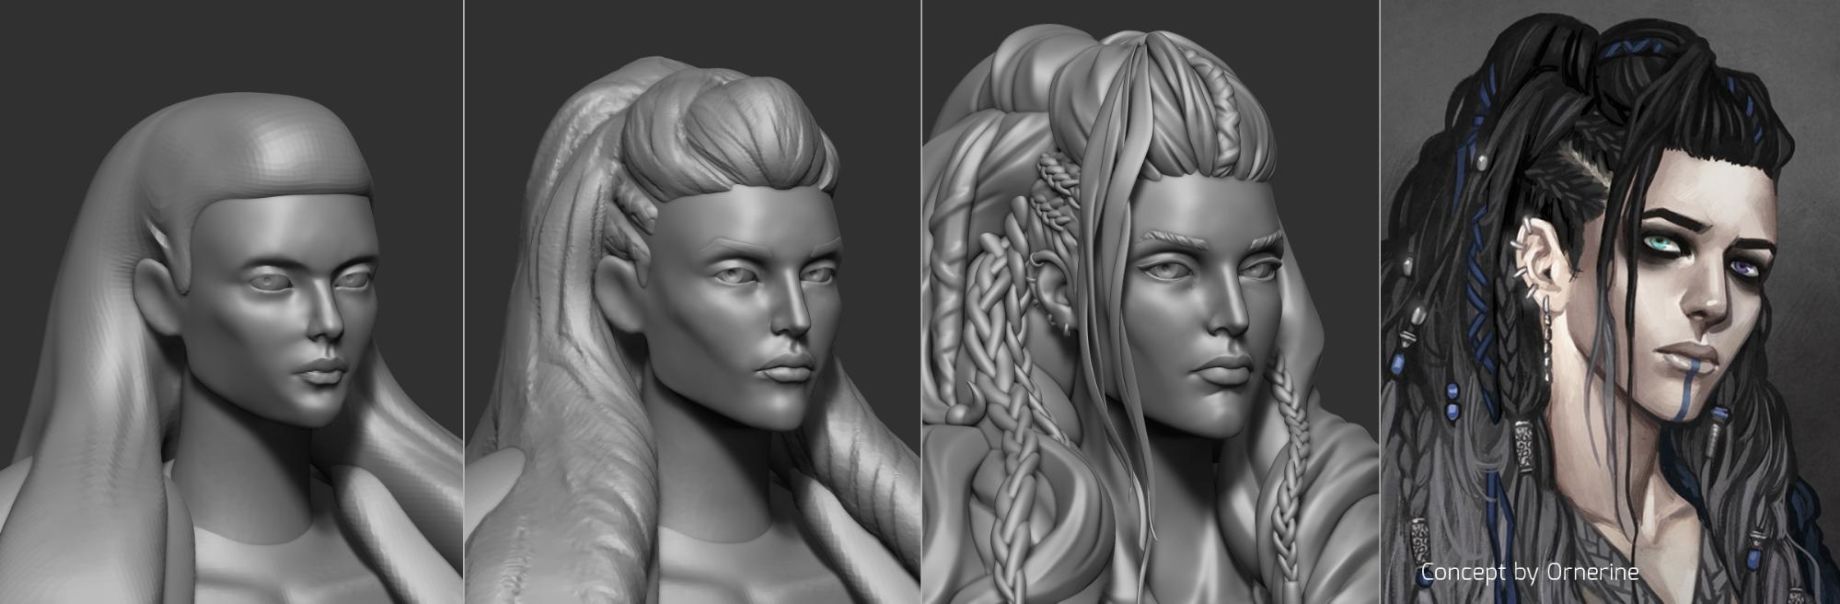 Stylized Character Breakdown: Sculpting in ZBrush & Anisotropic Hair